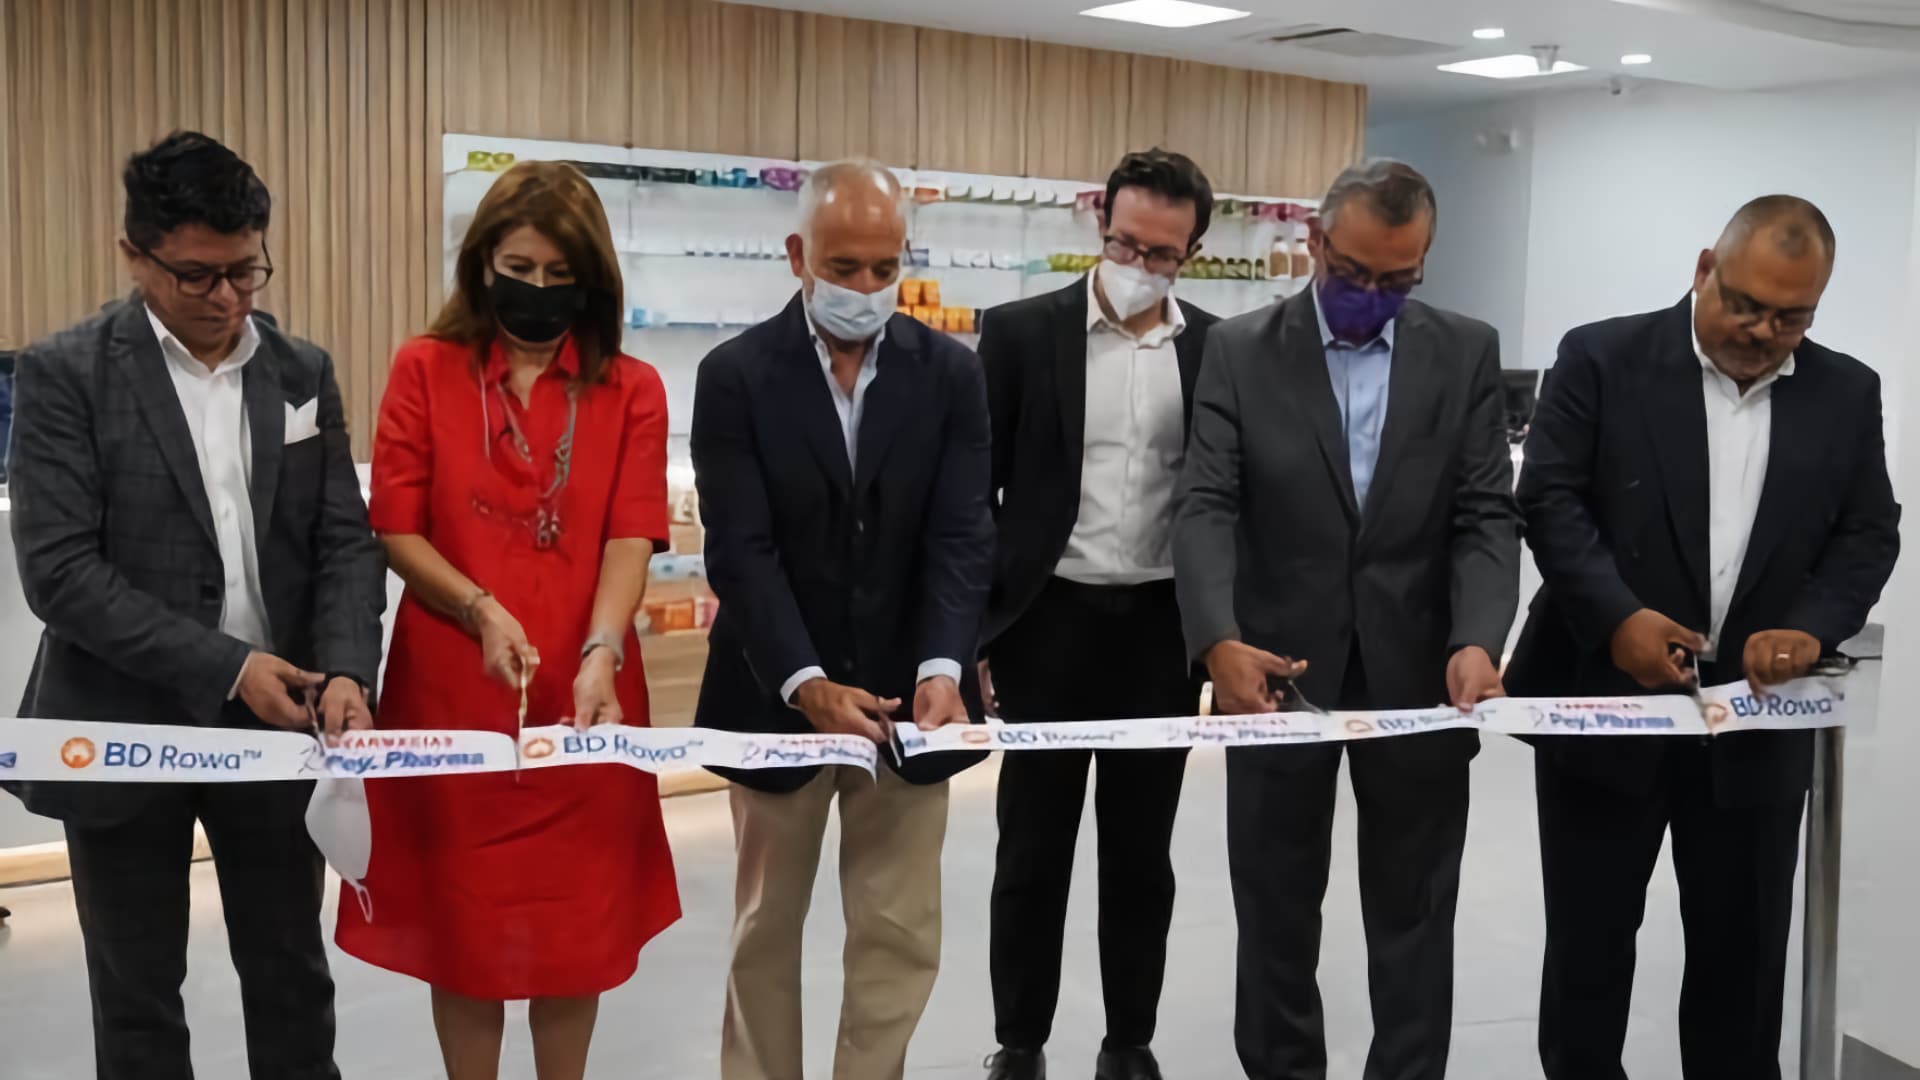 Becton Dickinson launches in Mexico BD Rowa, its line of robots specialized in pharmacy automation